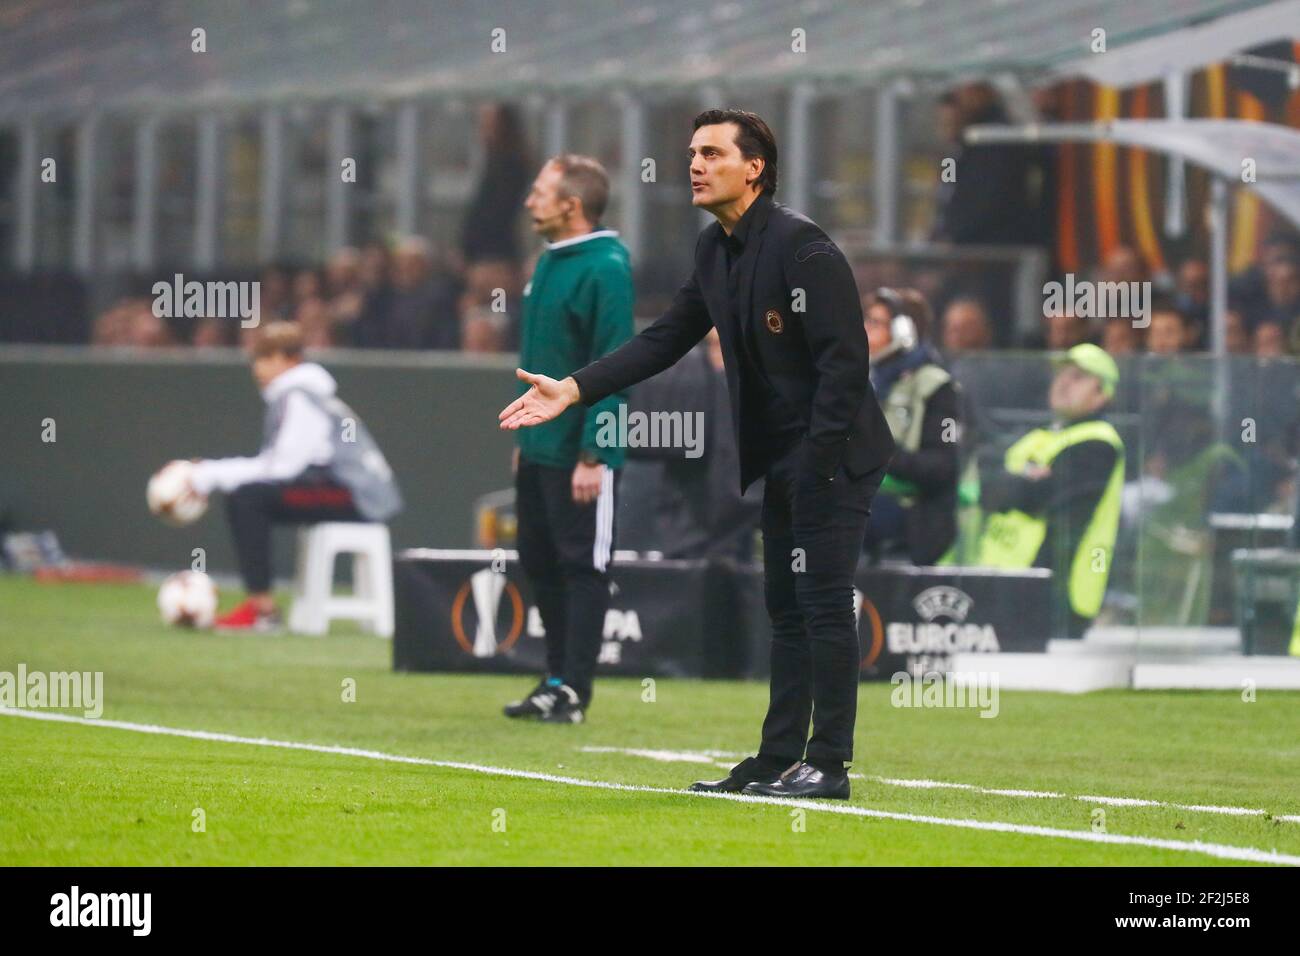 Aek Athens Coach High Resolution Stock Photography and Images - Alamy